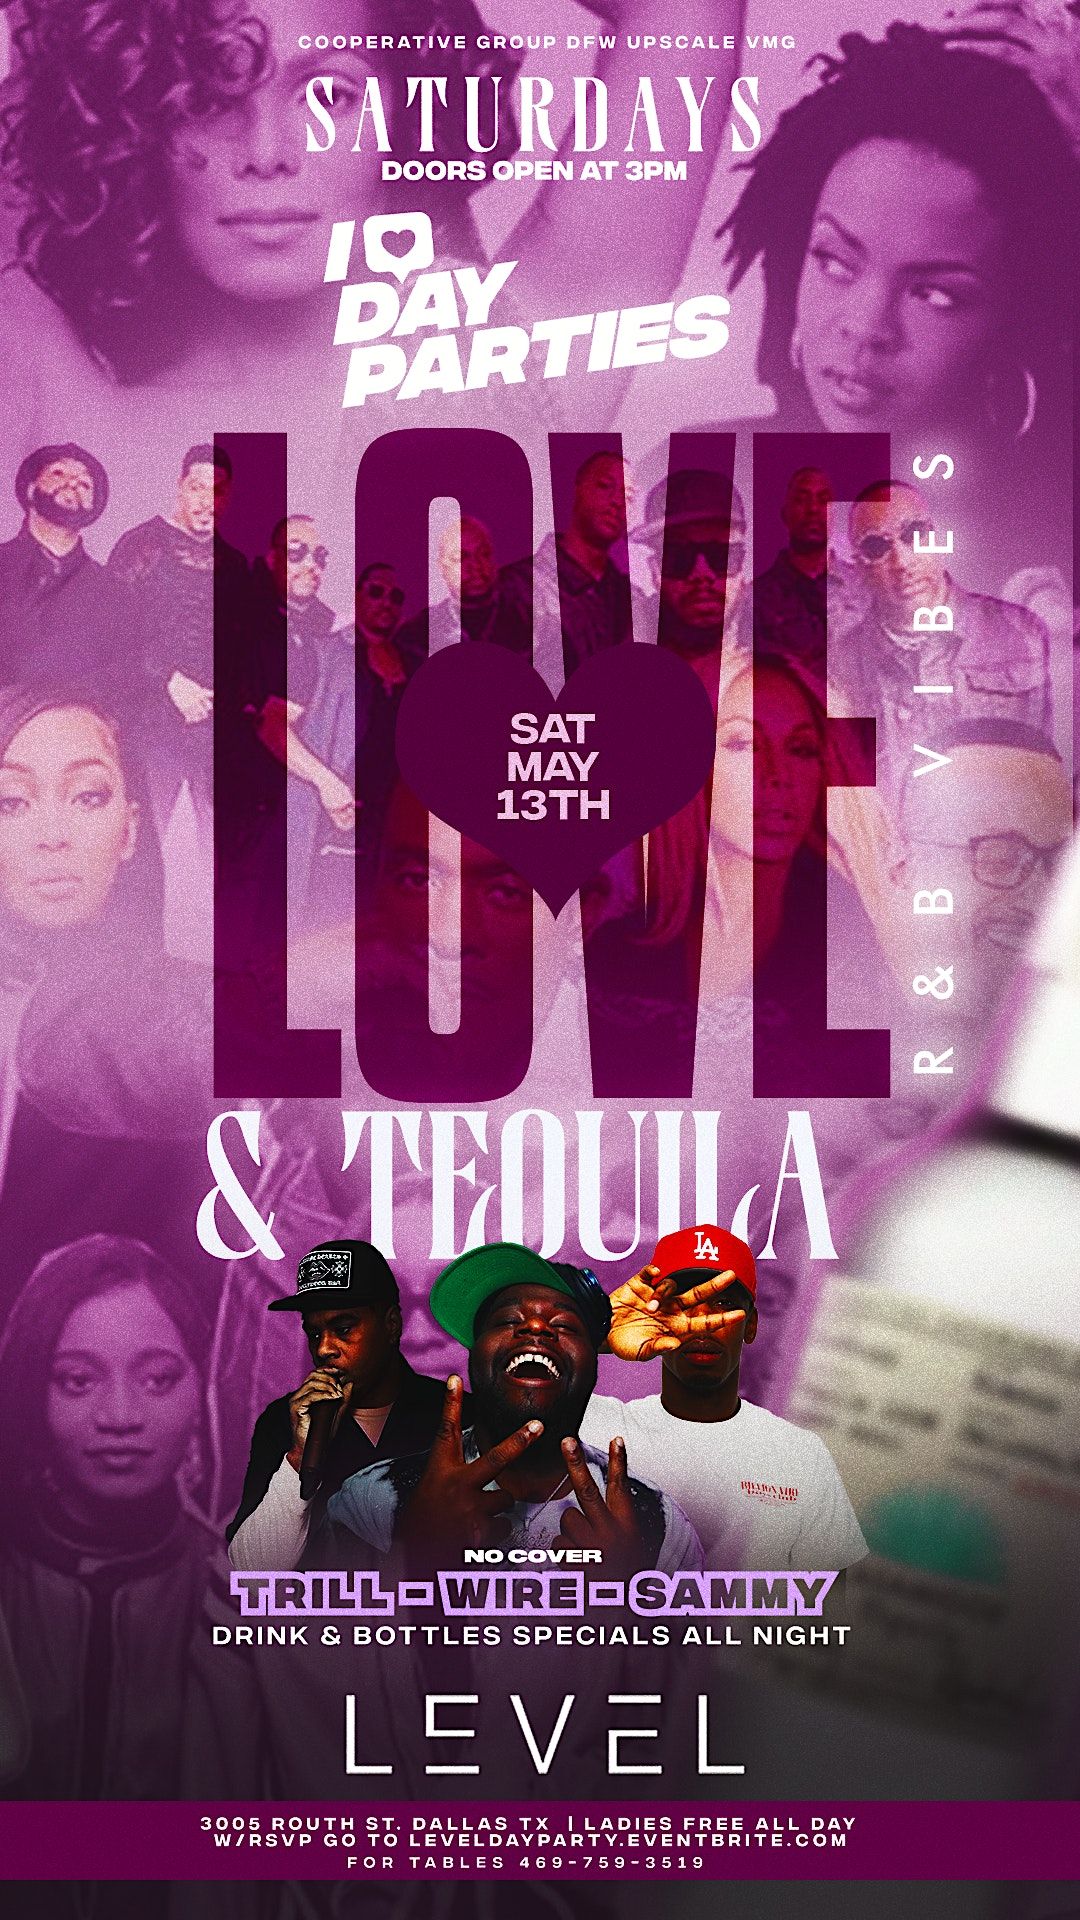 R&B & Tequlia Day Party this Saturday @ Level Uptown